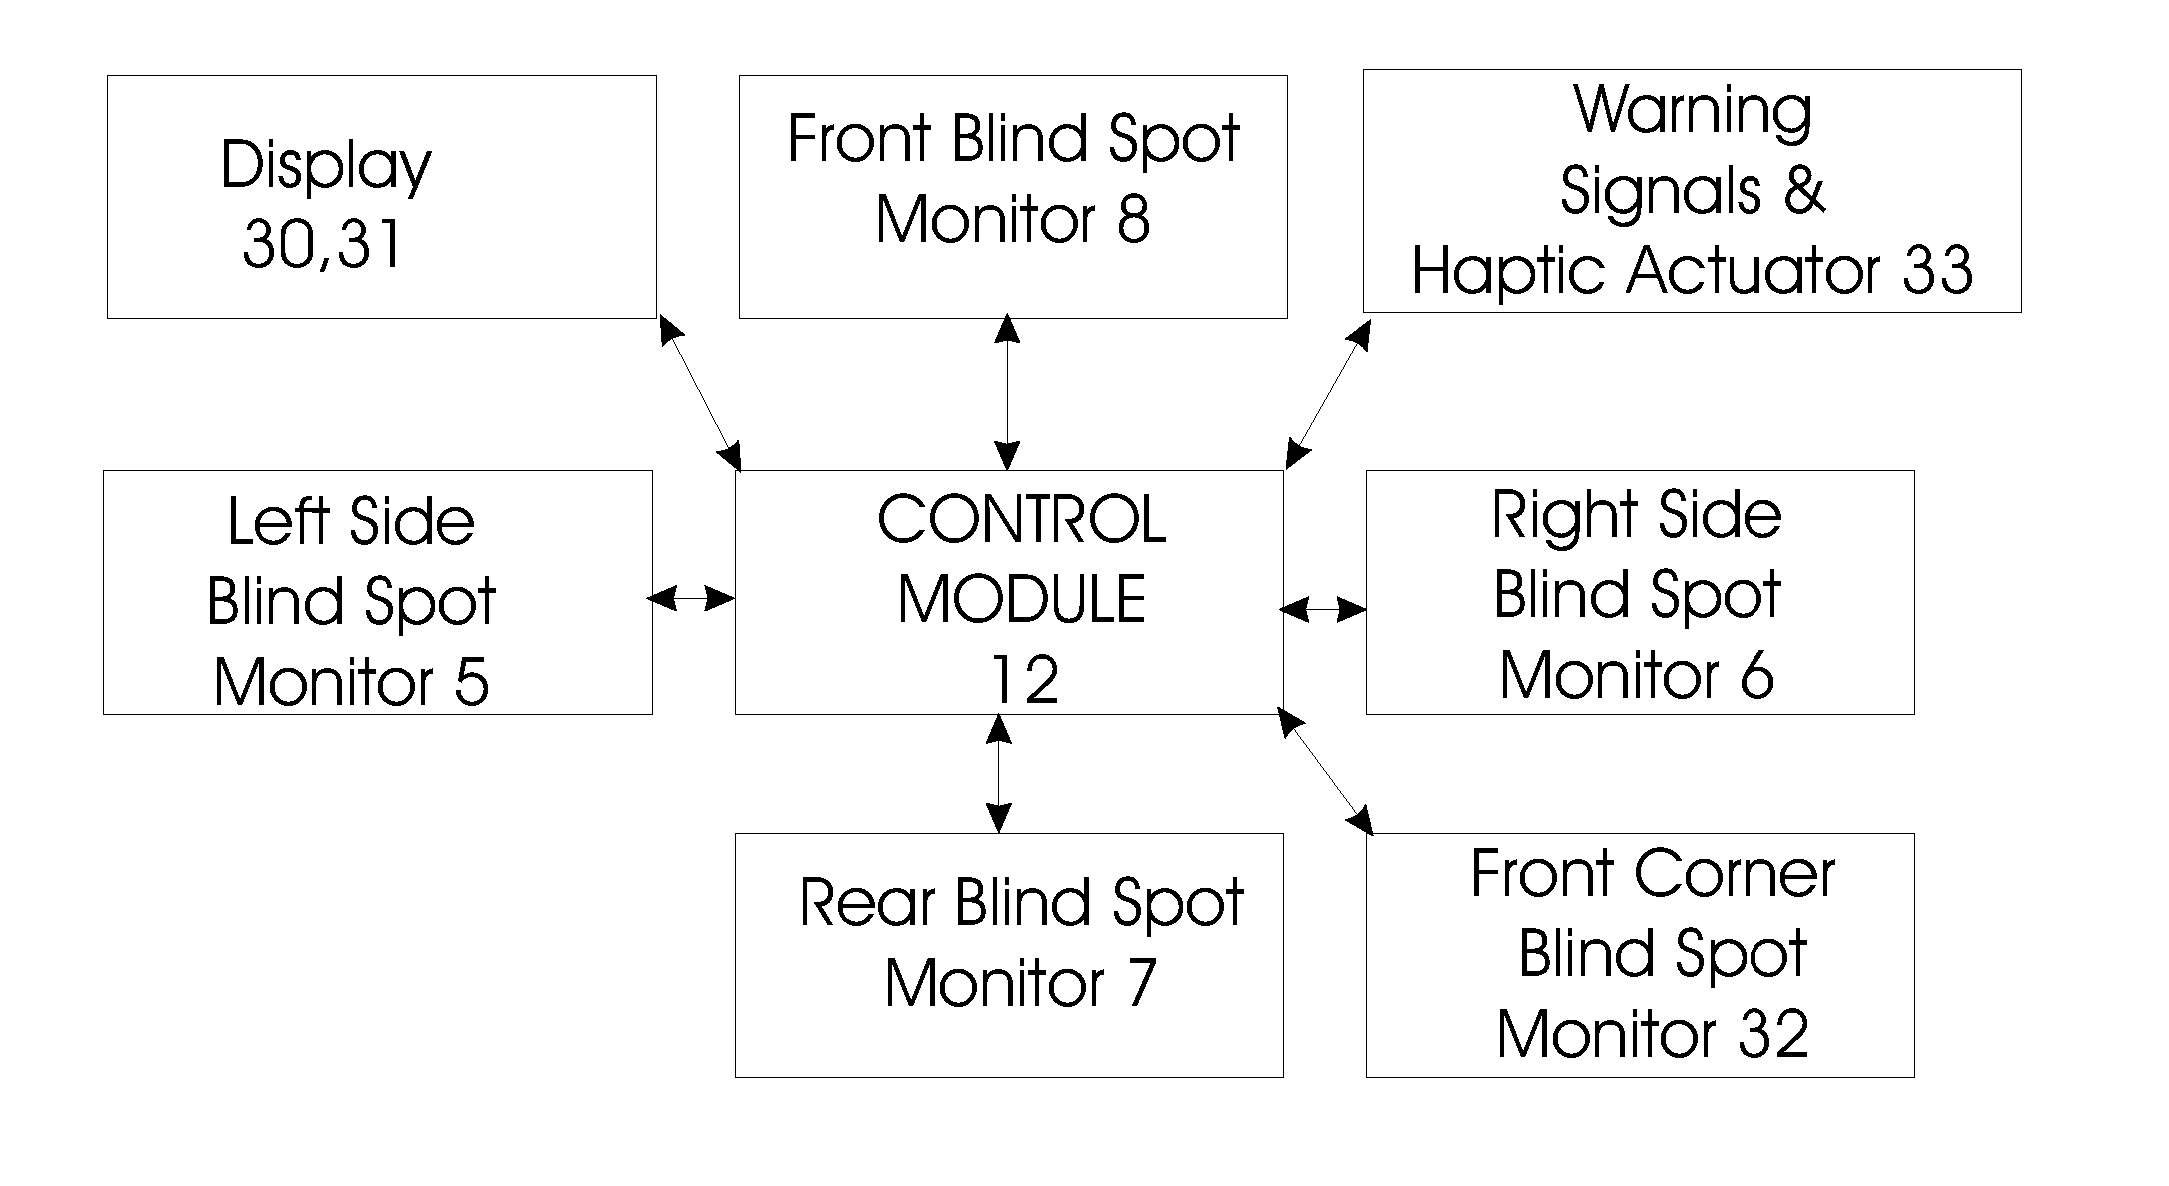 Vehicular Component Control Methods Based on Blind Spot Monitoring